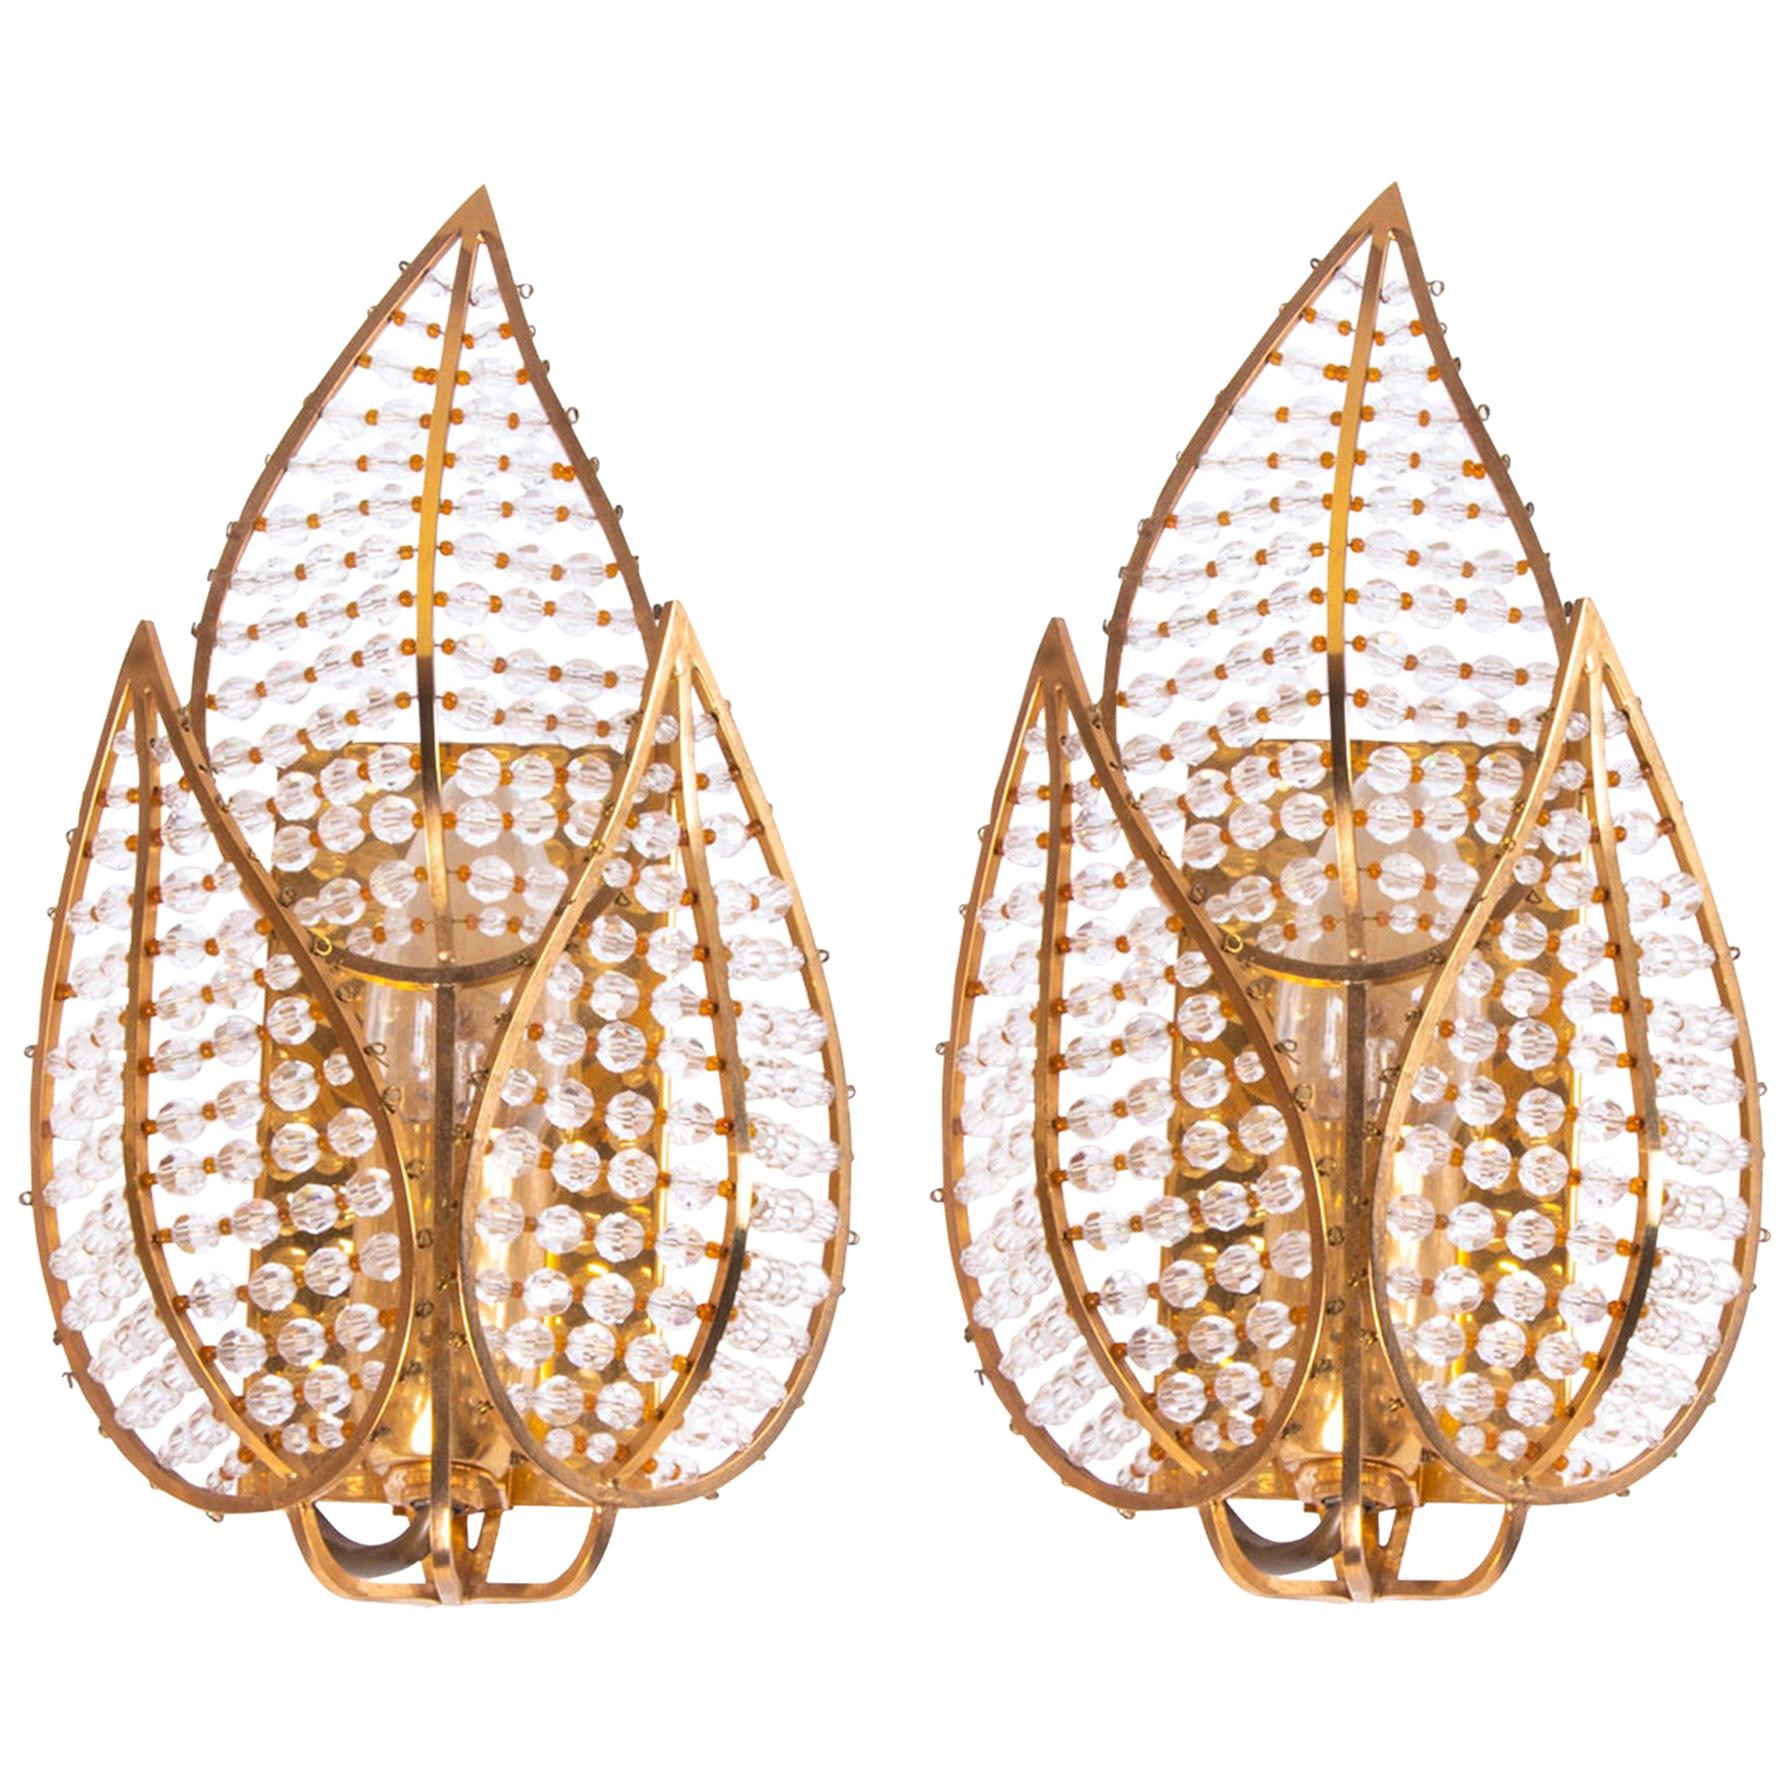 1960 Germany Palwa Lovely Wall Sconce Crystal & Gilt-Brass, Set of 2 For Sale